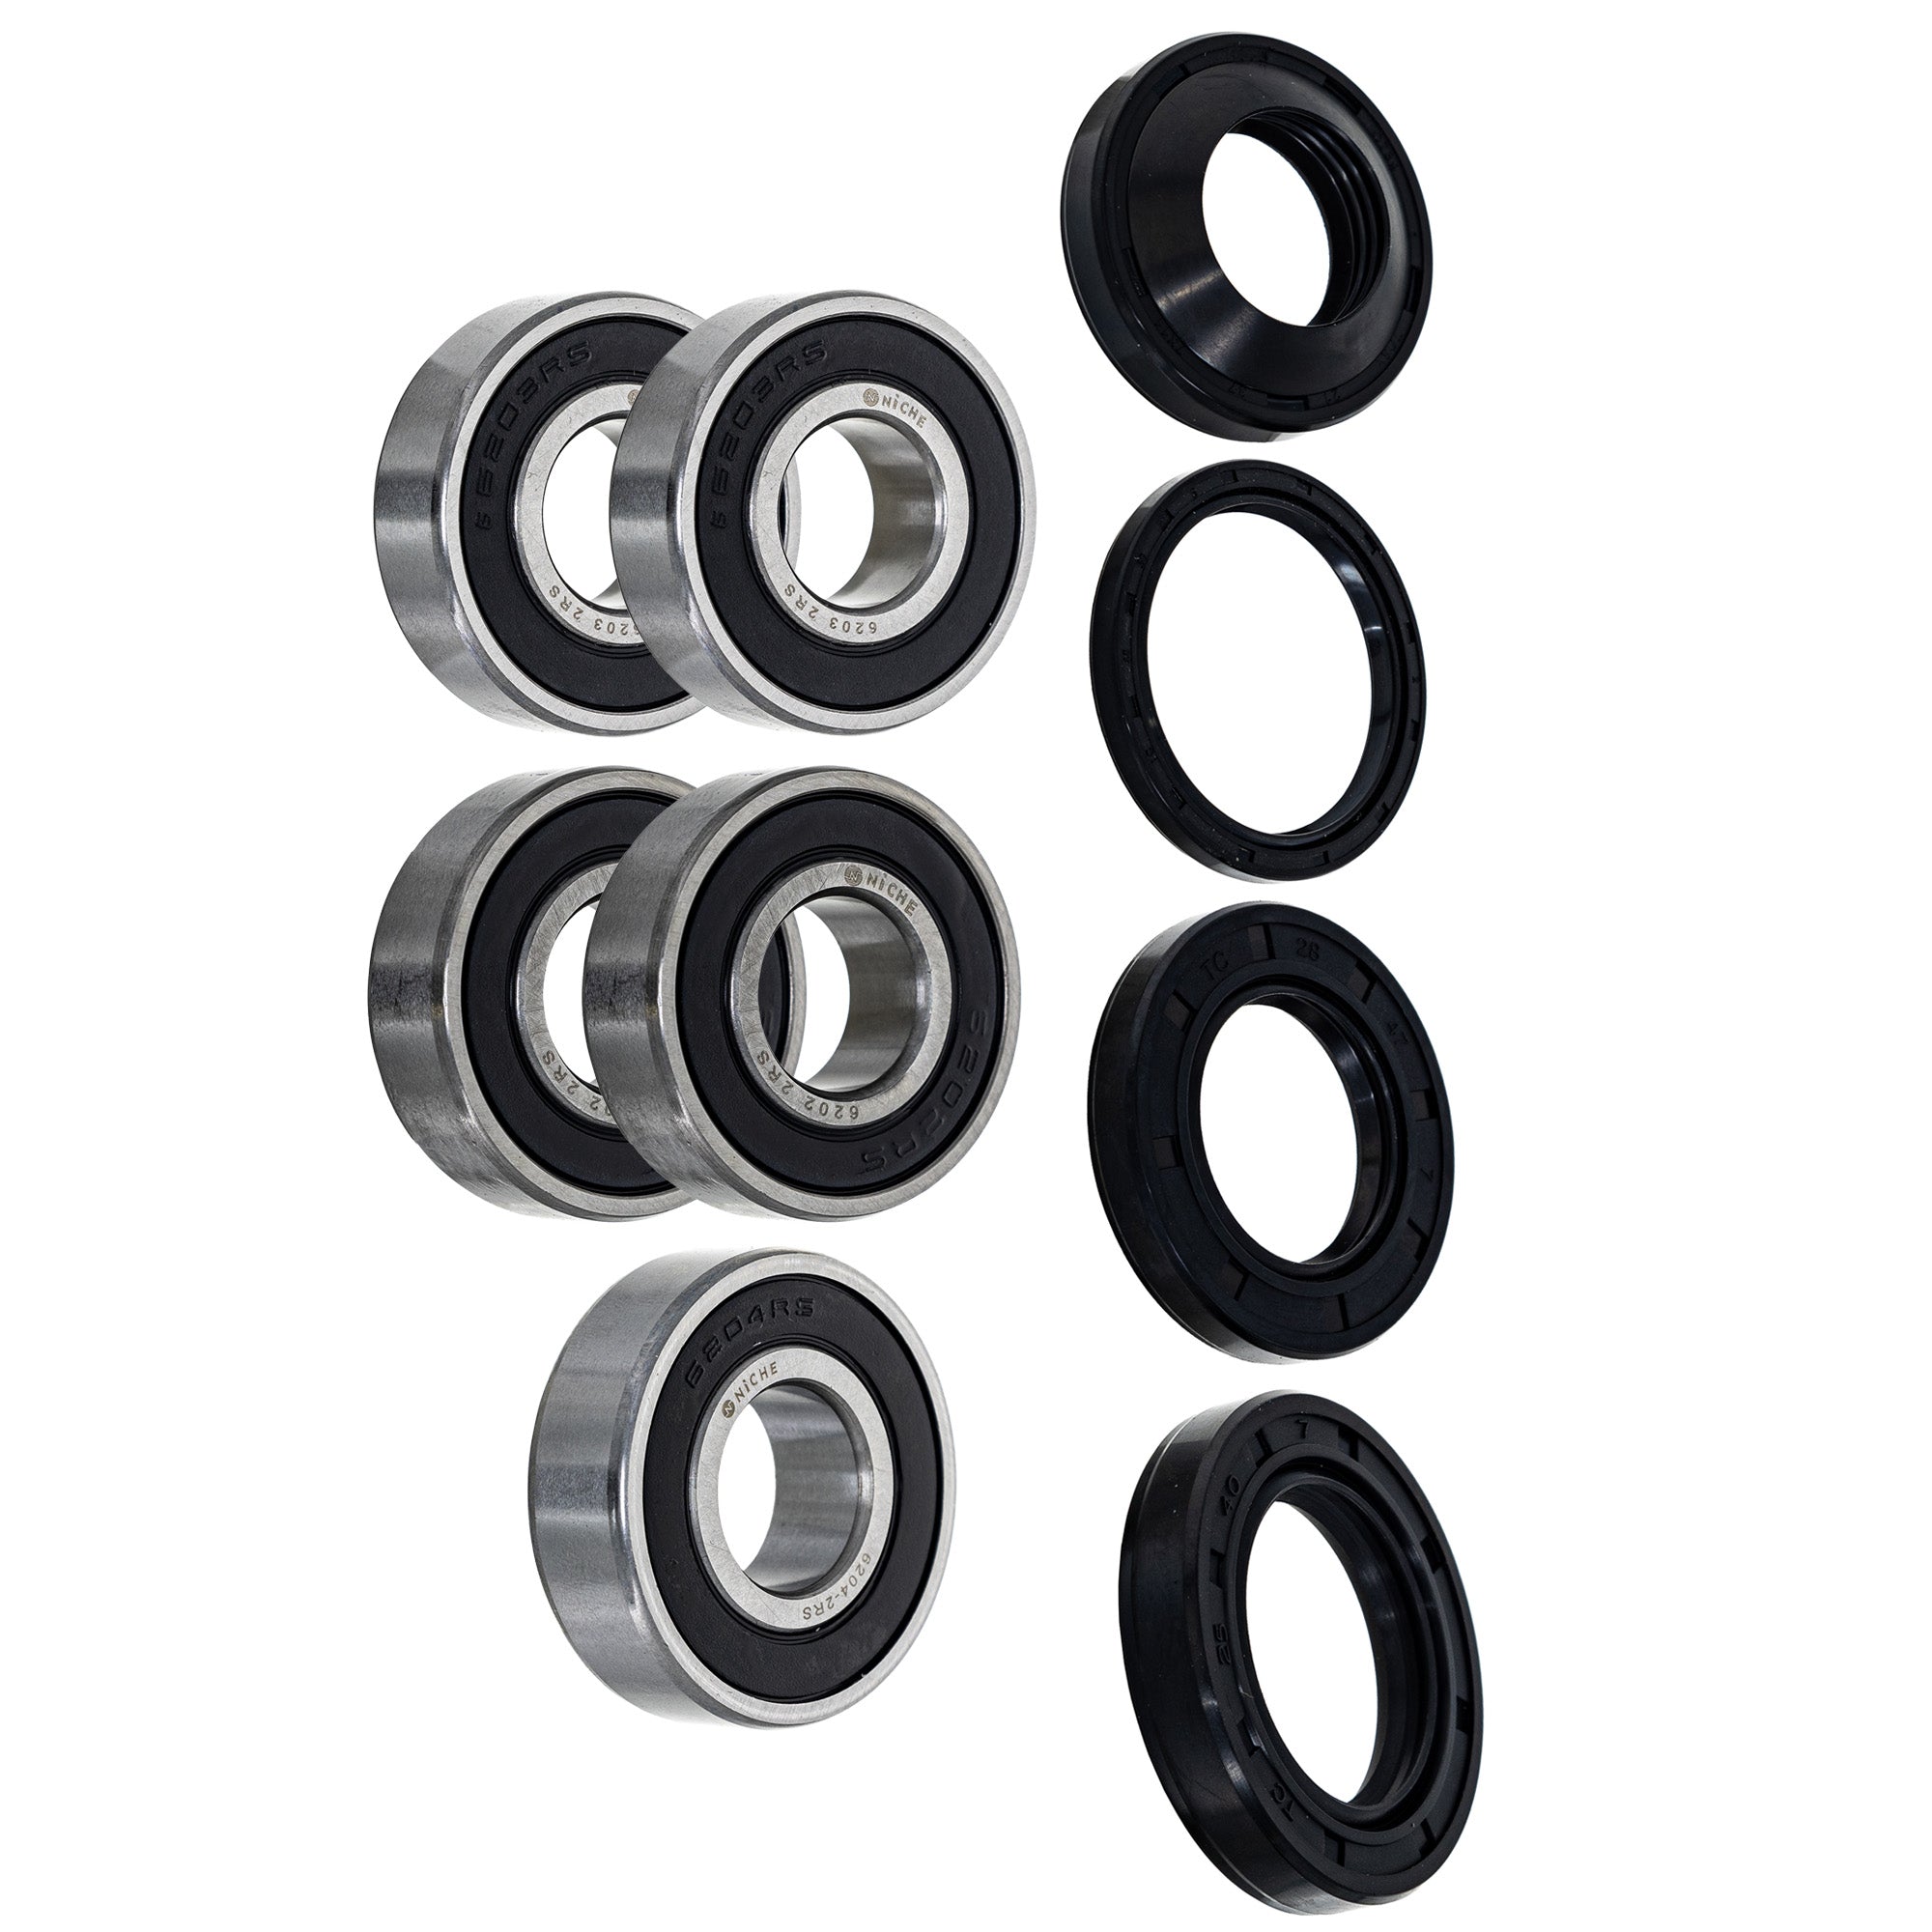 Wheel Bearing Seal Kit for zOTHER Ref No XR250L NICHE MK1008814